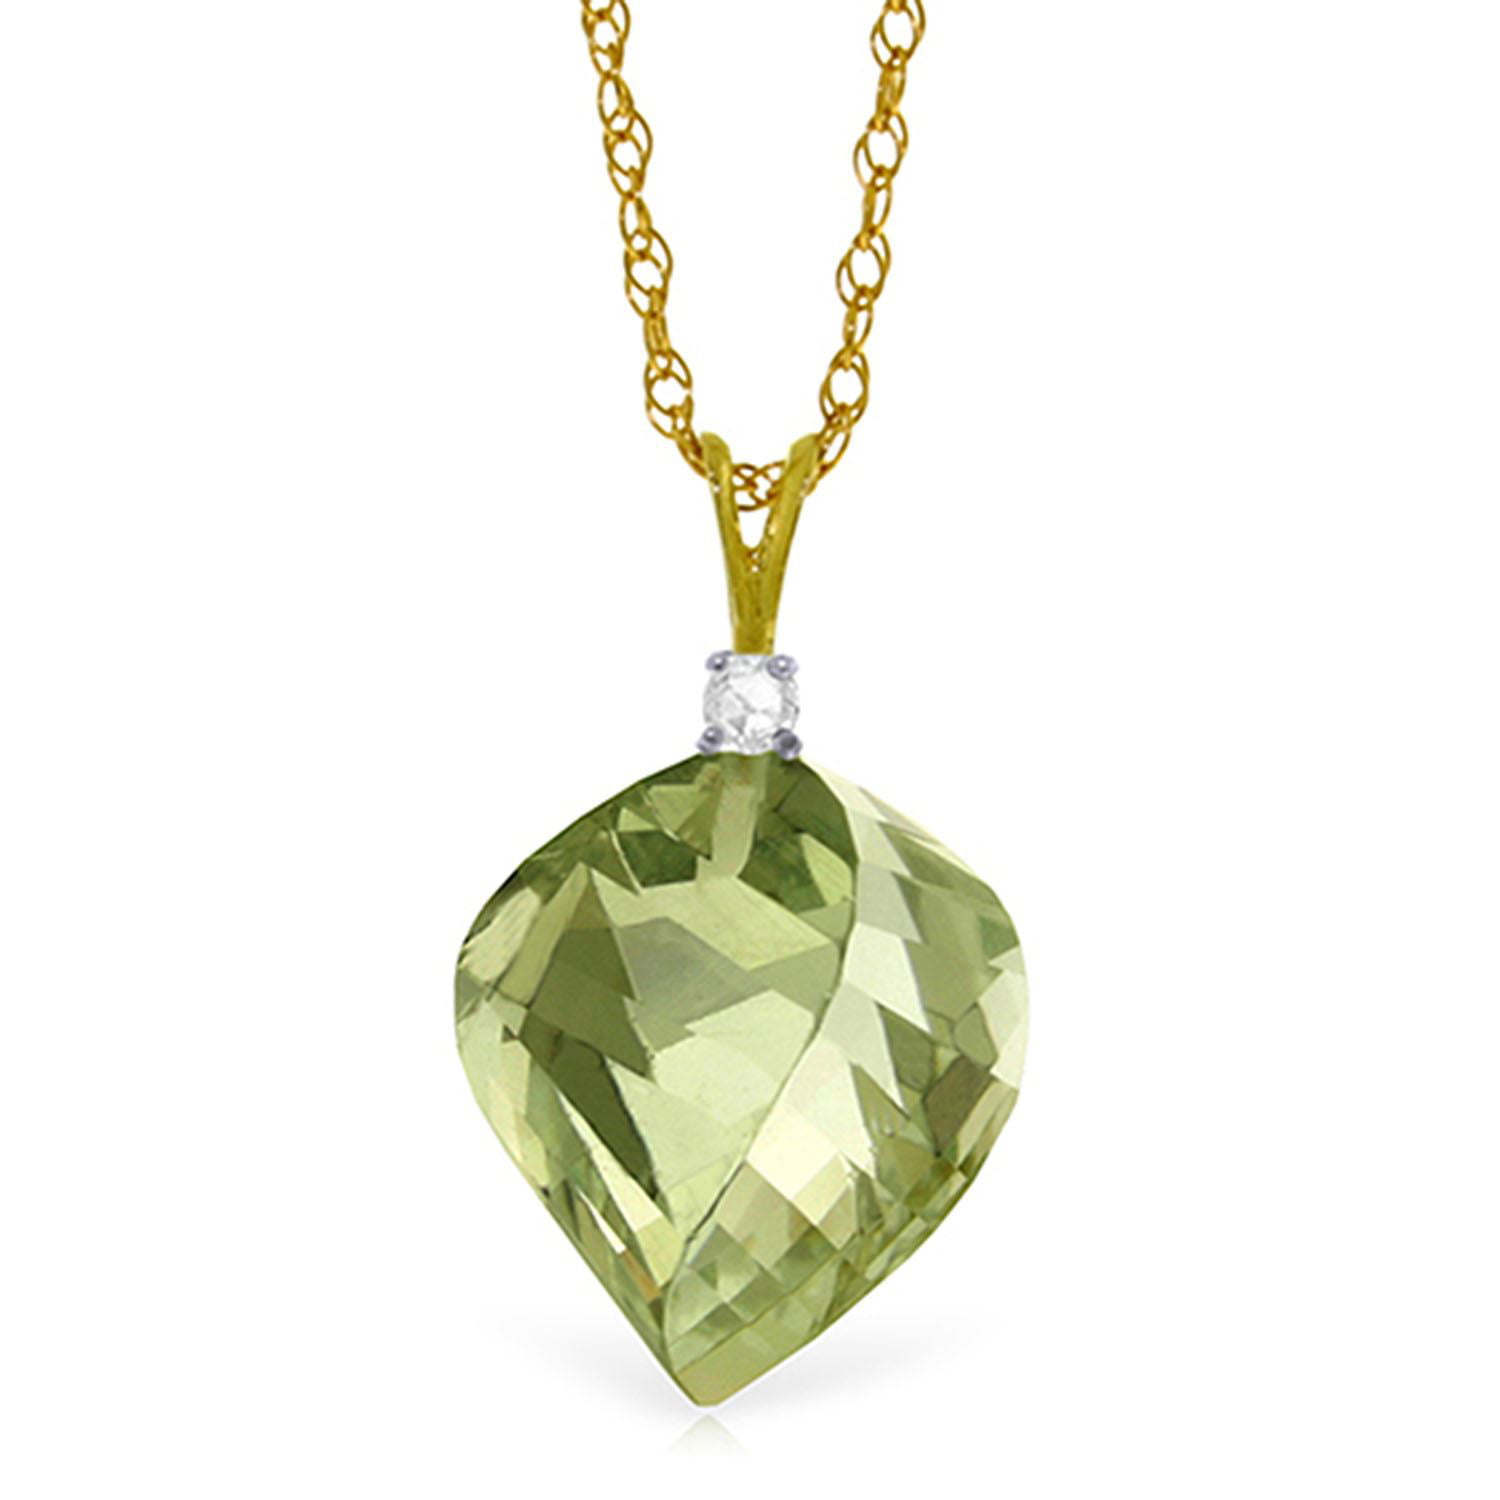 ALARRI 1.45 CTW 14K Solid Gold Boundless Moment Green Amethyst Necklace with 22 Inch Chain Length 